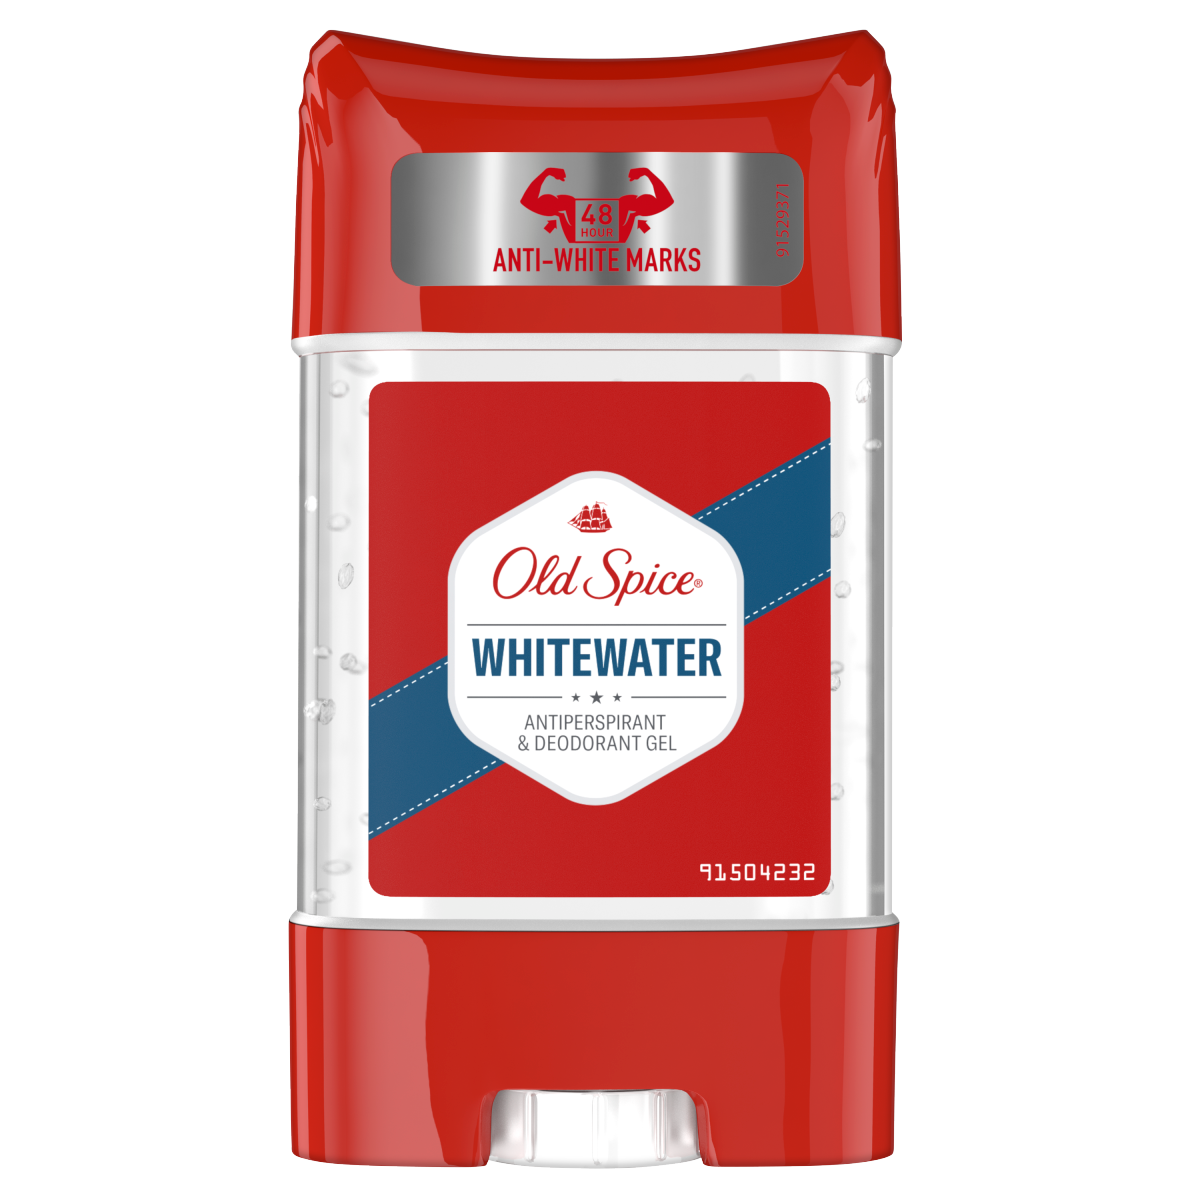 DEO GEL OLD SPICE WHITEWATER 70ML-91883957 # 6 buc